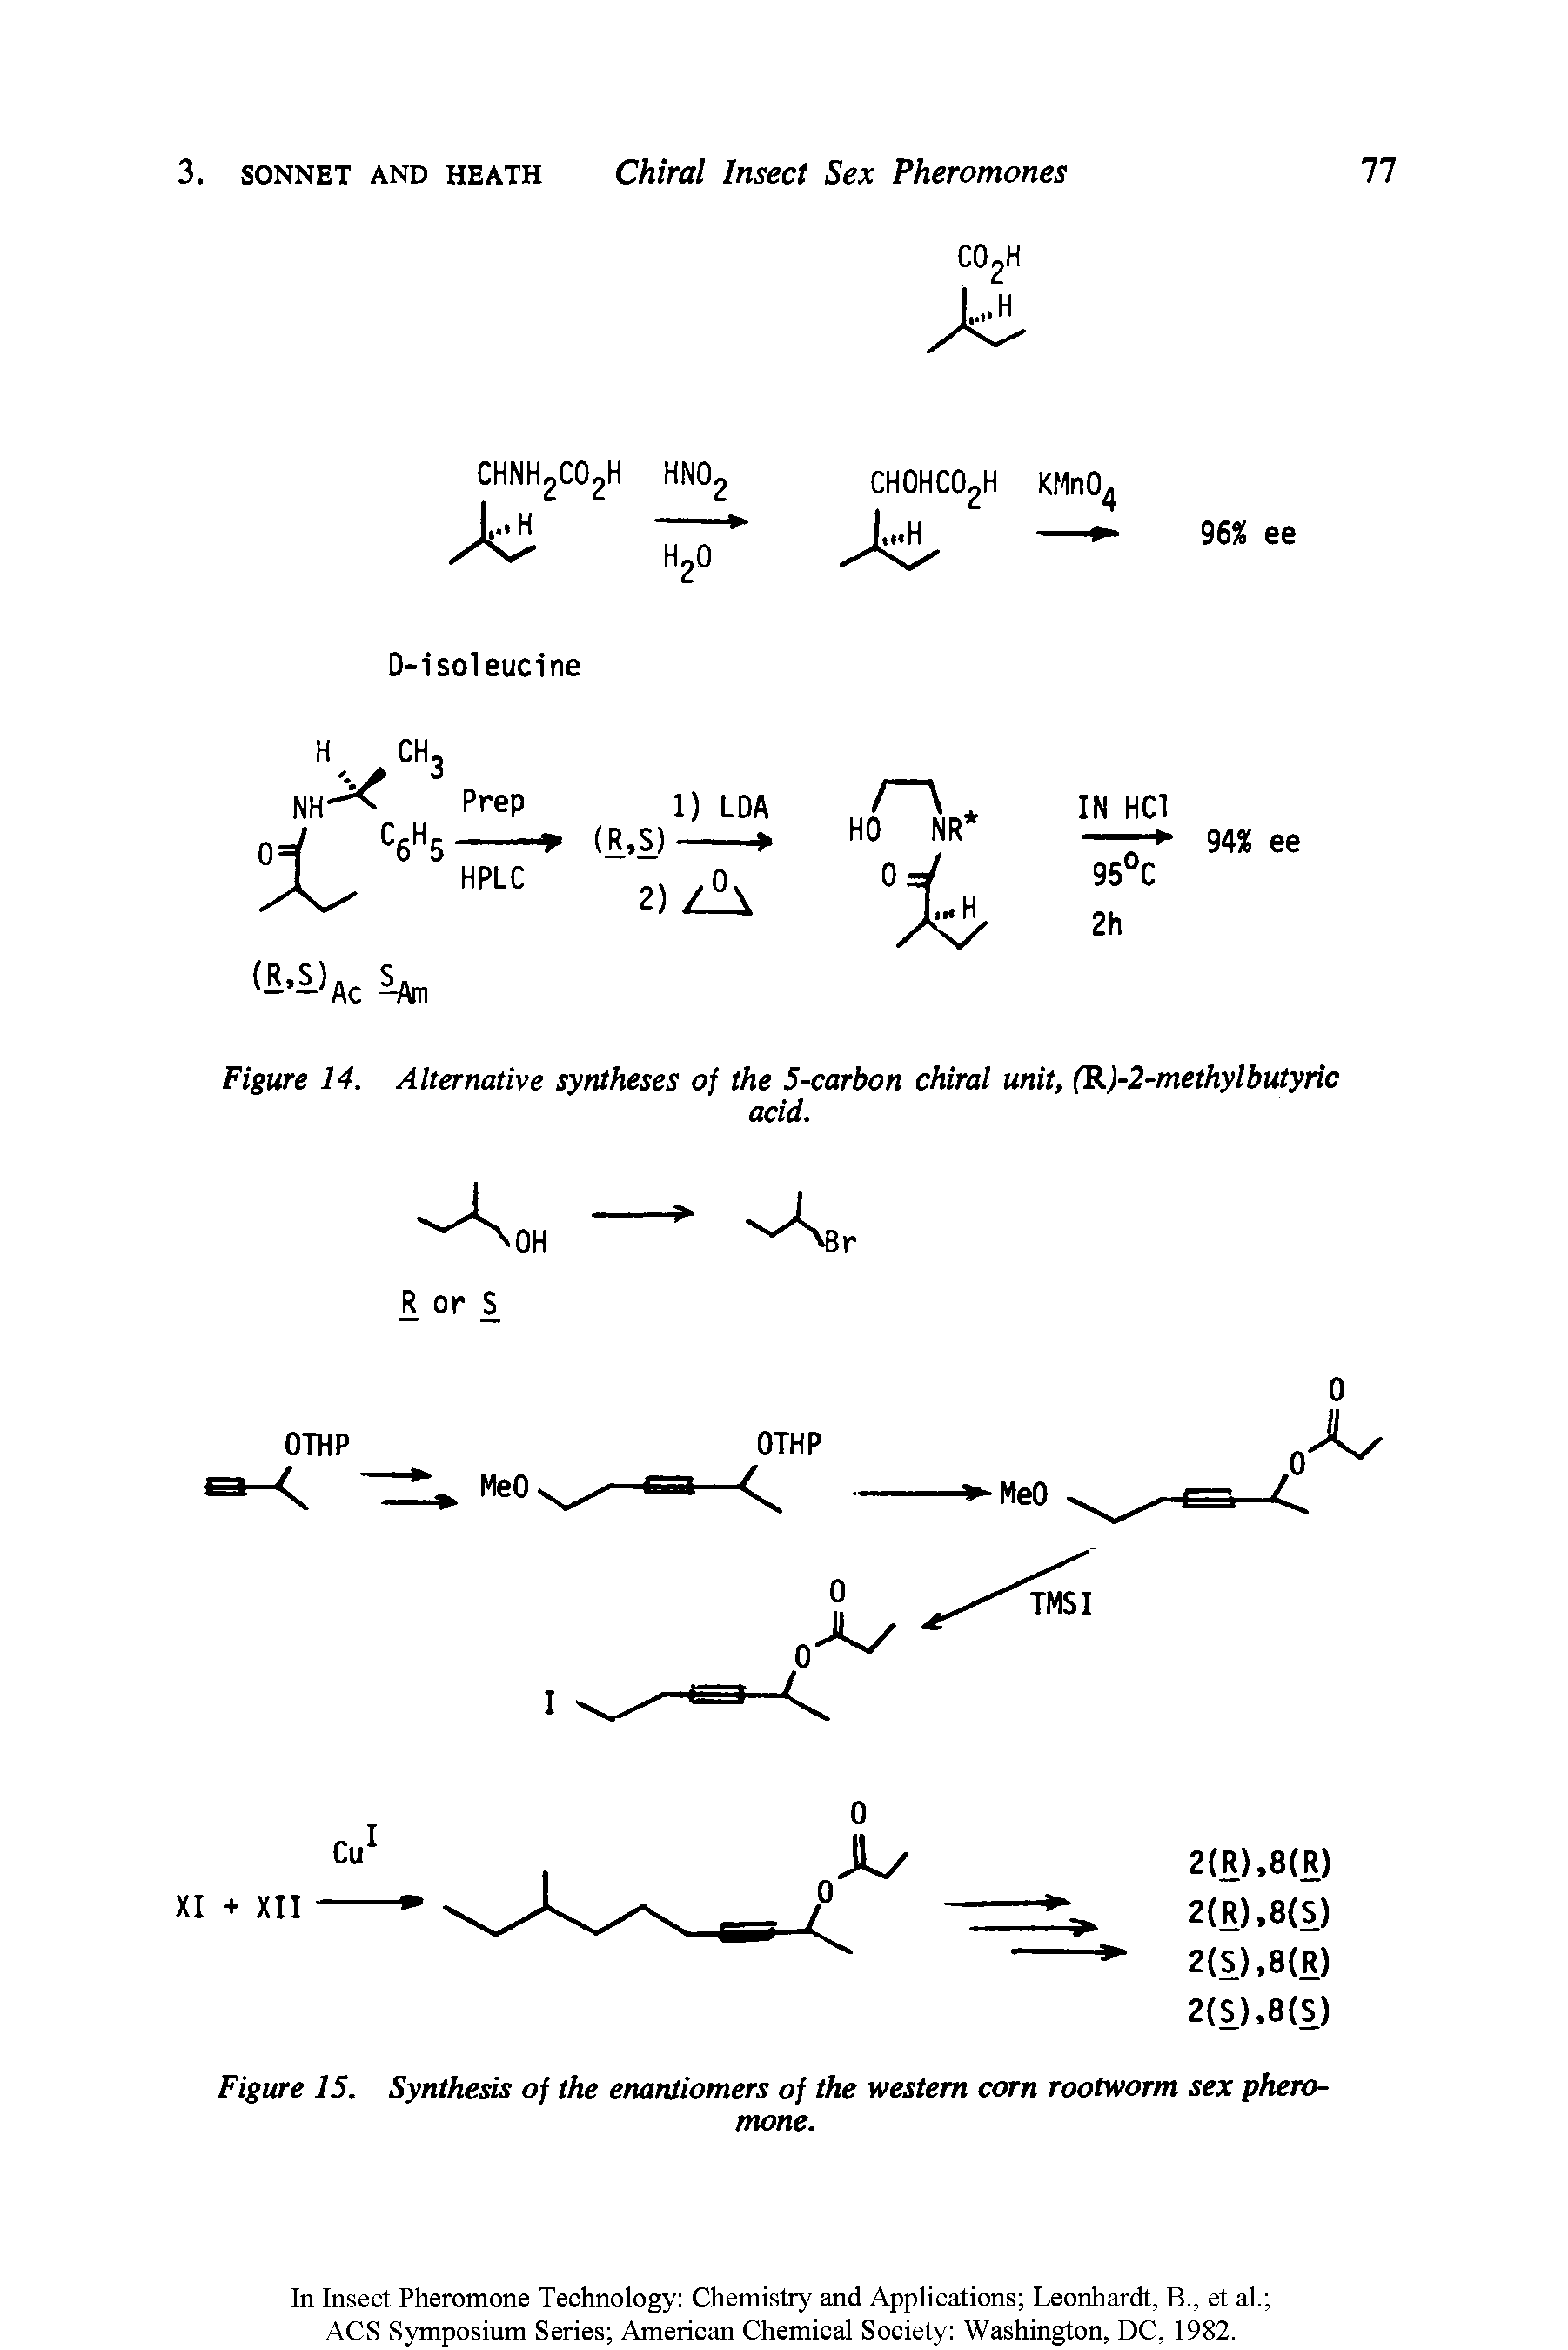 Figure 14. Alternative syntheses of the 5-carbon chiral unit, (R)-2-methylbutyric...